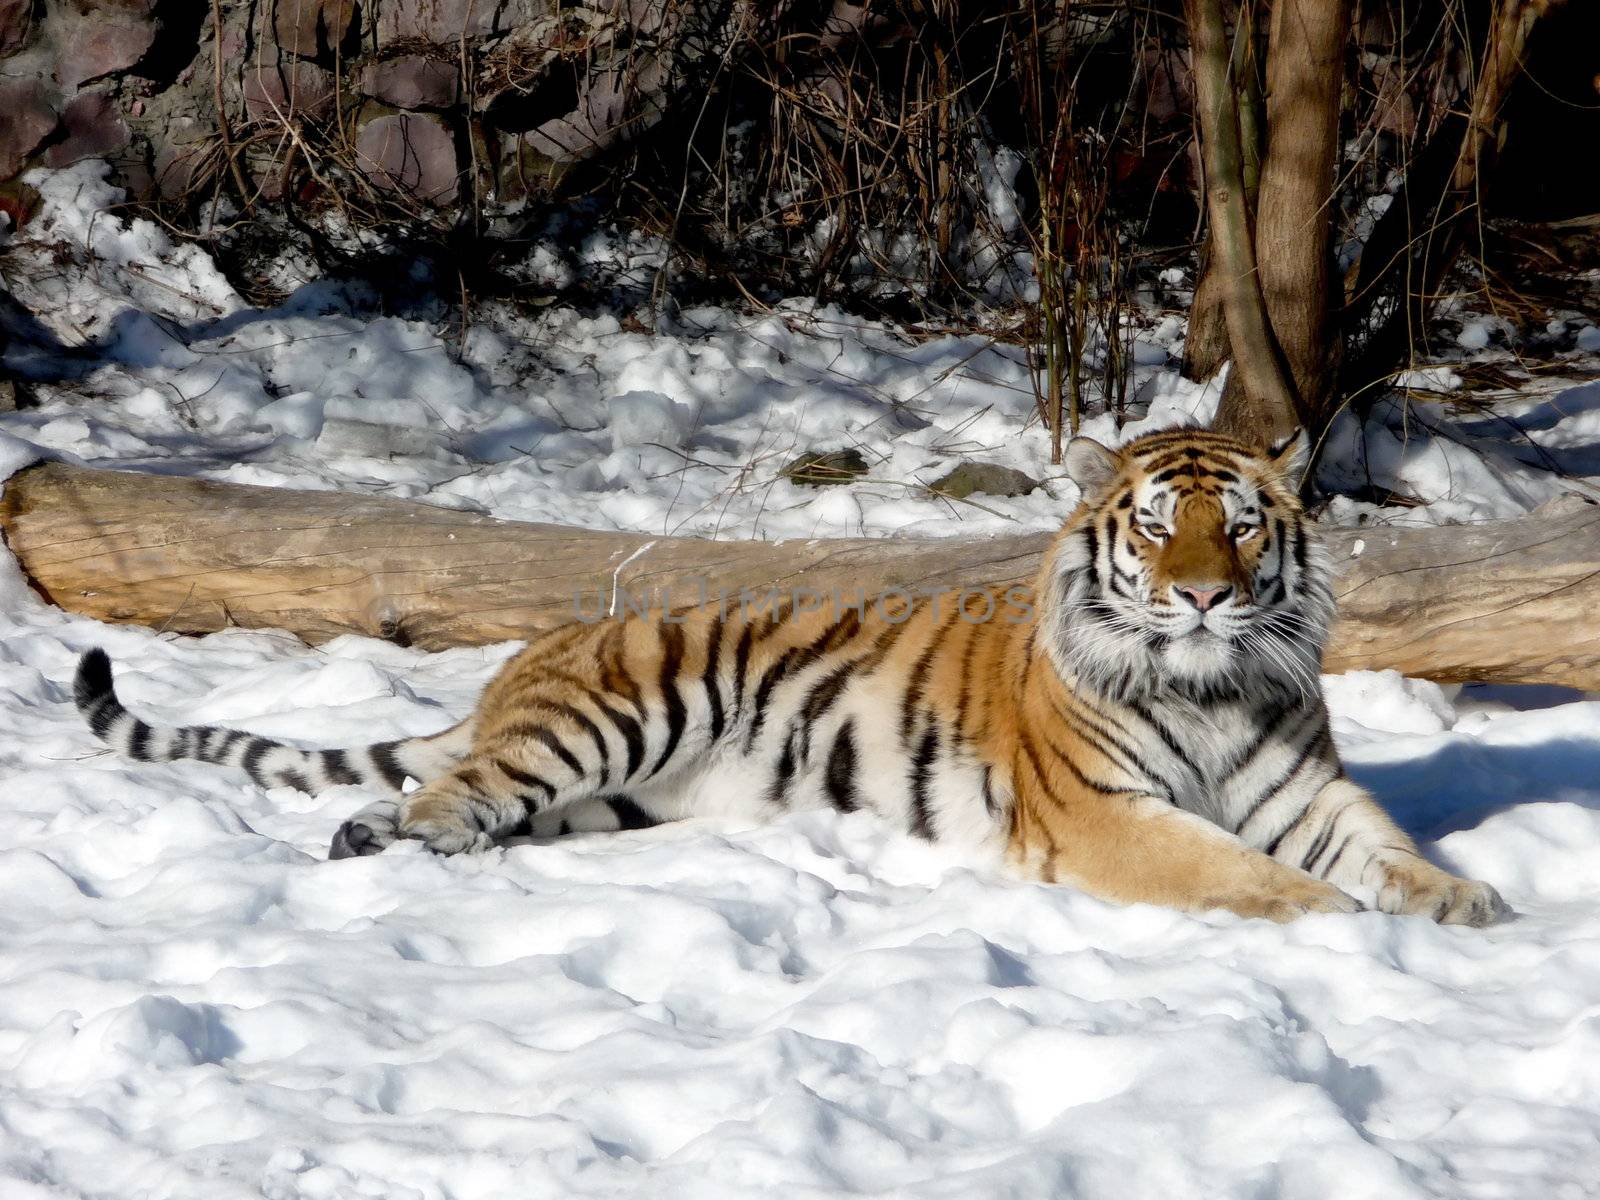 Tiger on the snow by tomatto